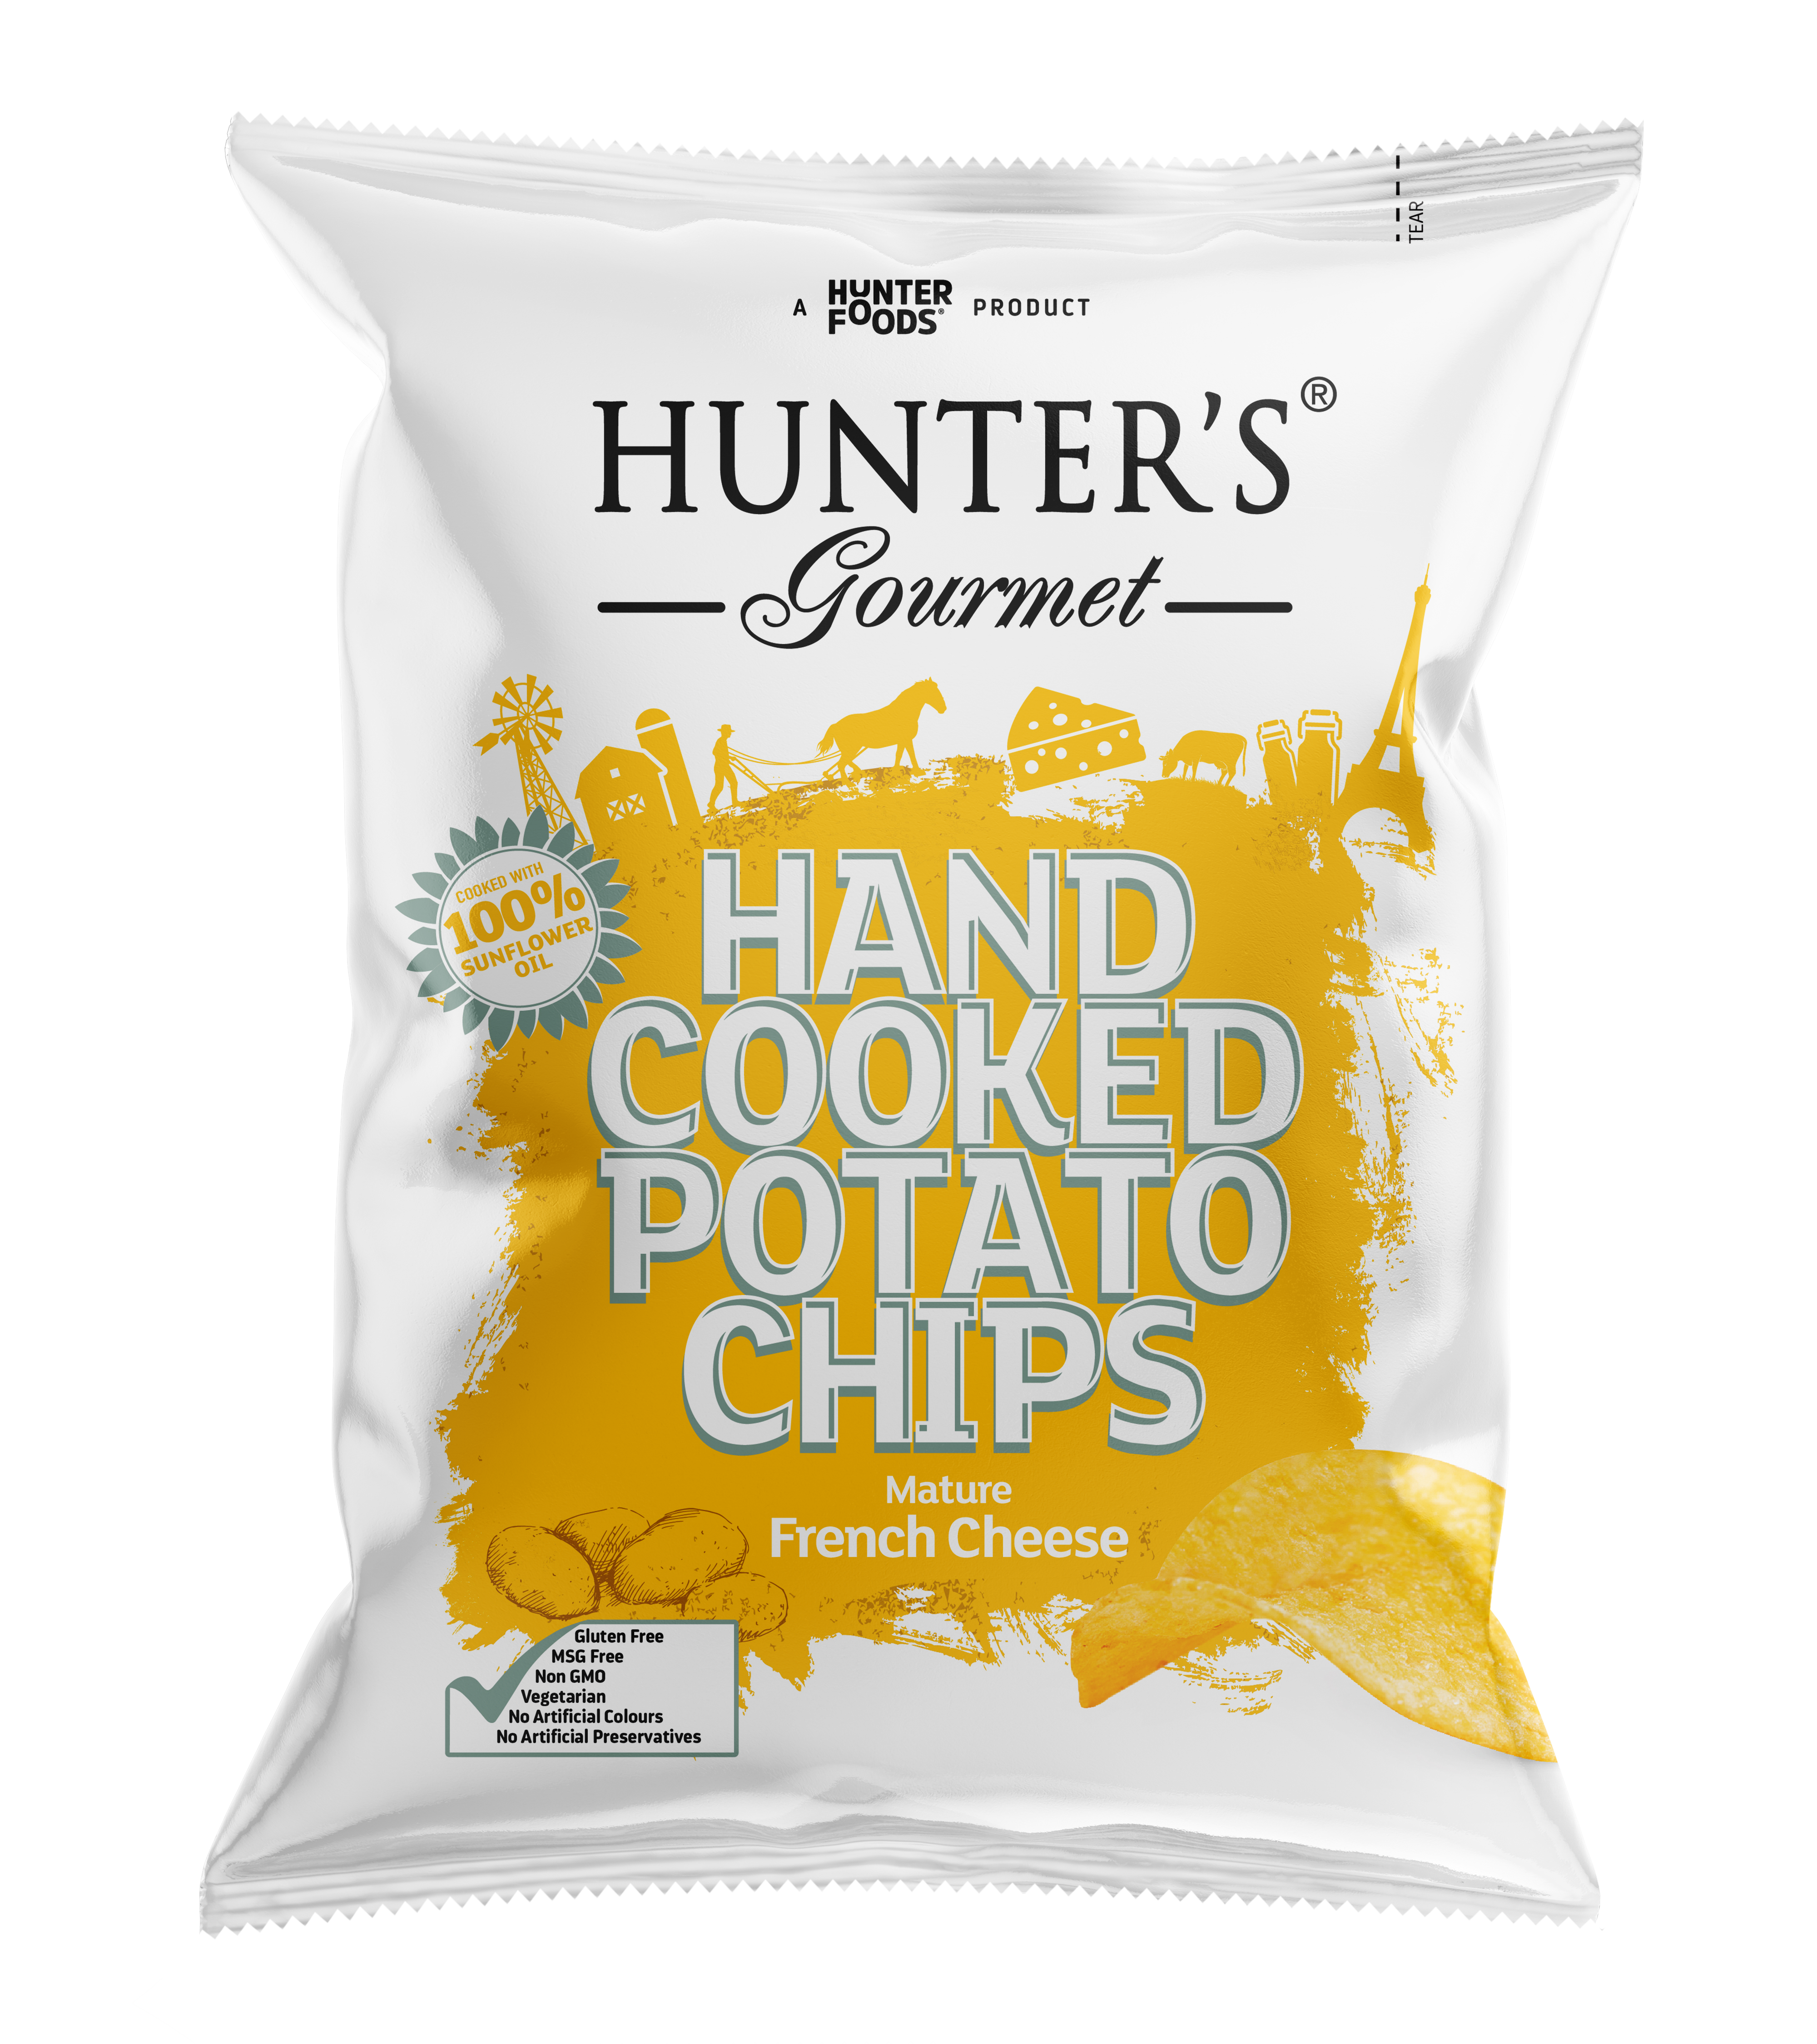 Hunter's Gourmet Hand Cooked Potato Chips Mature French Cheese 24 units per case 40 g